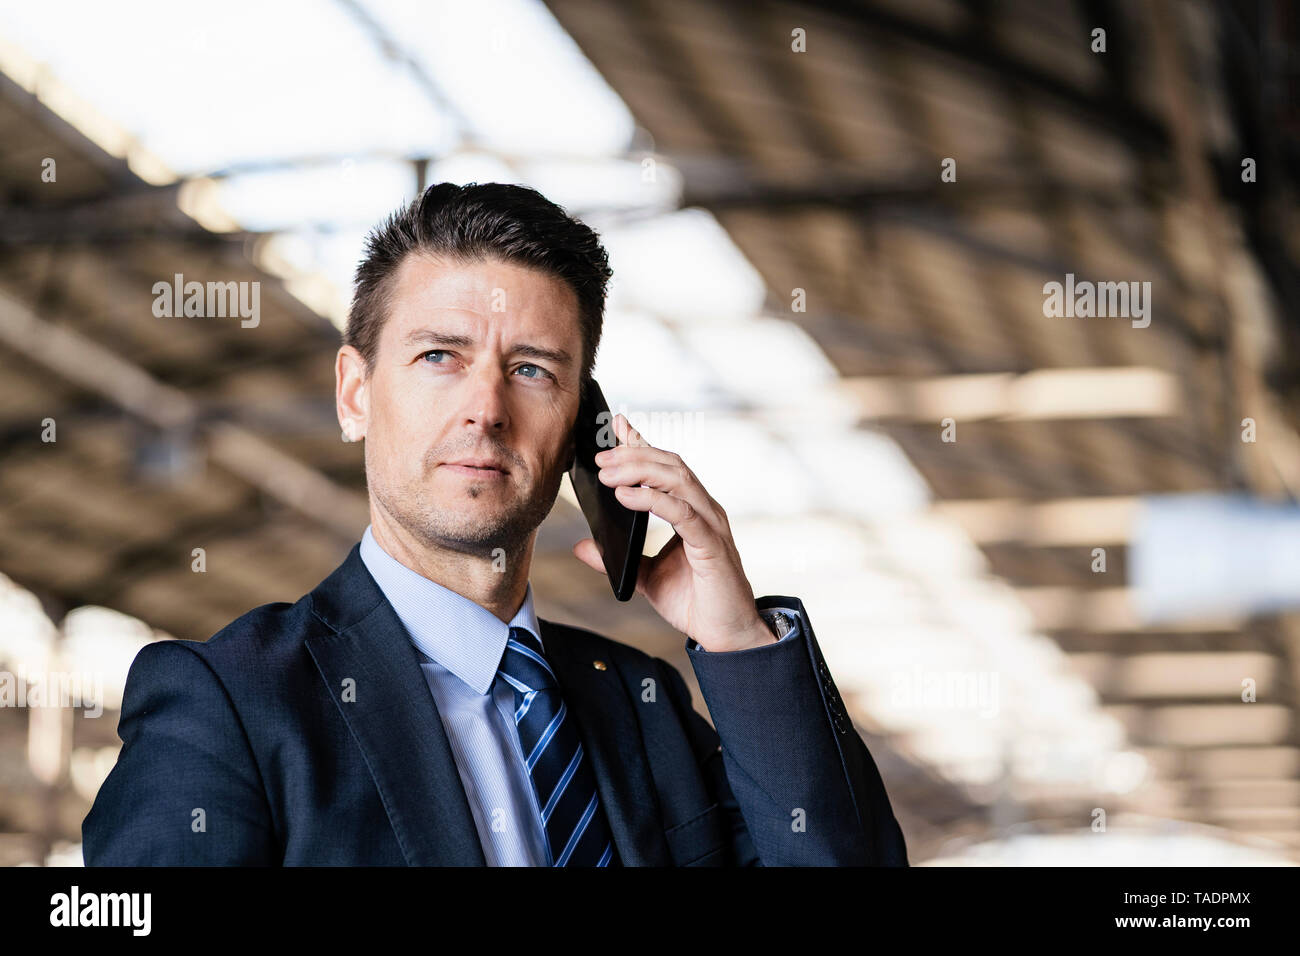 Businessman on cell phone at train station Stock Photo